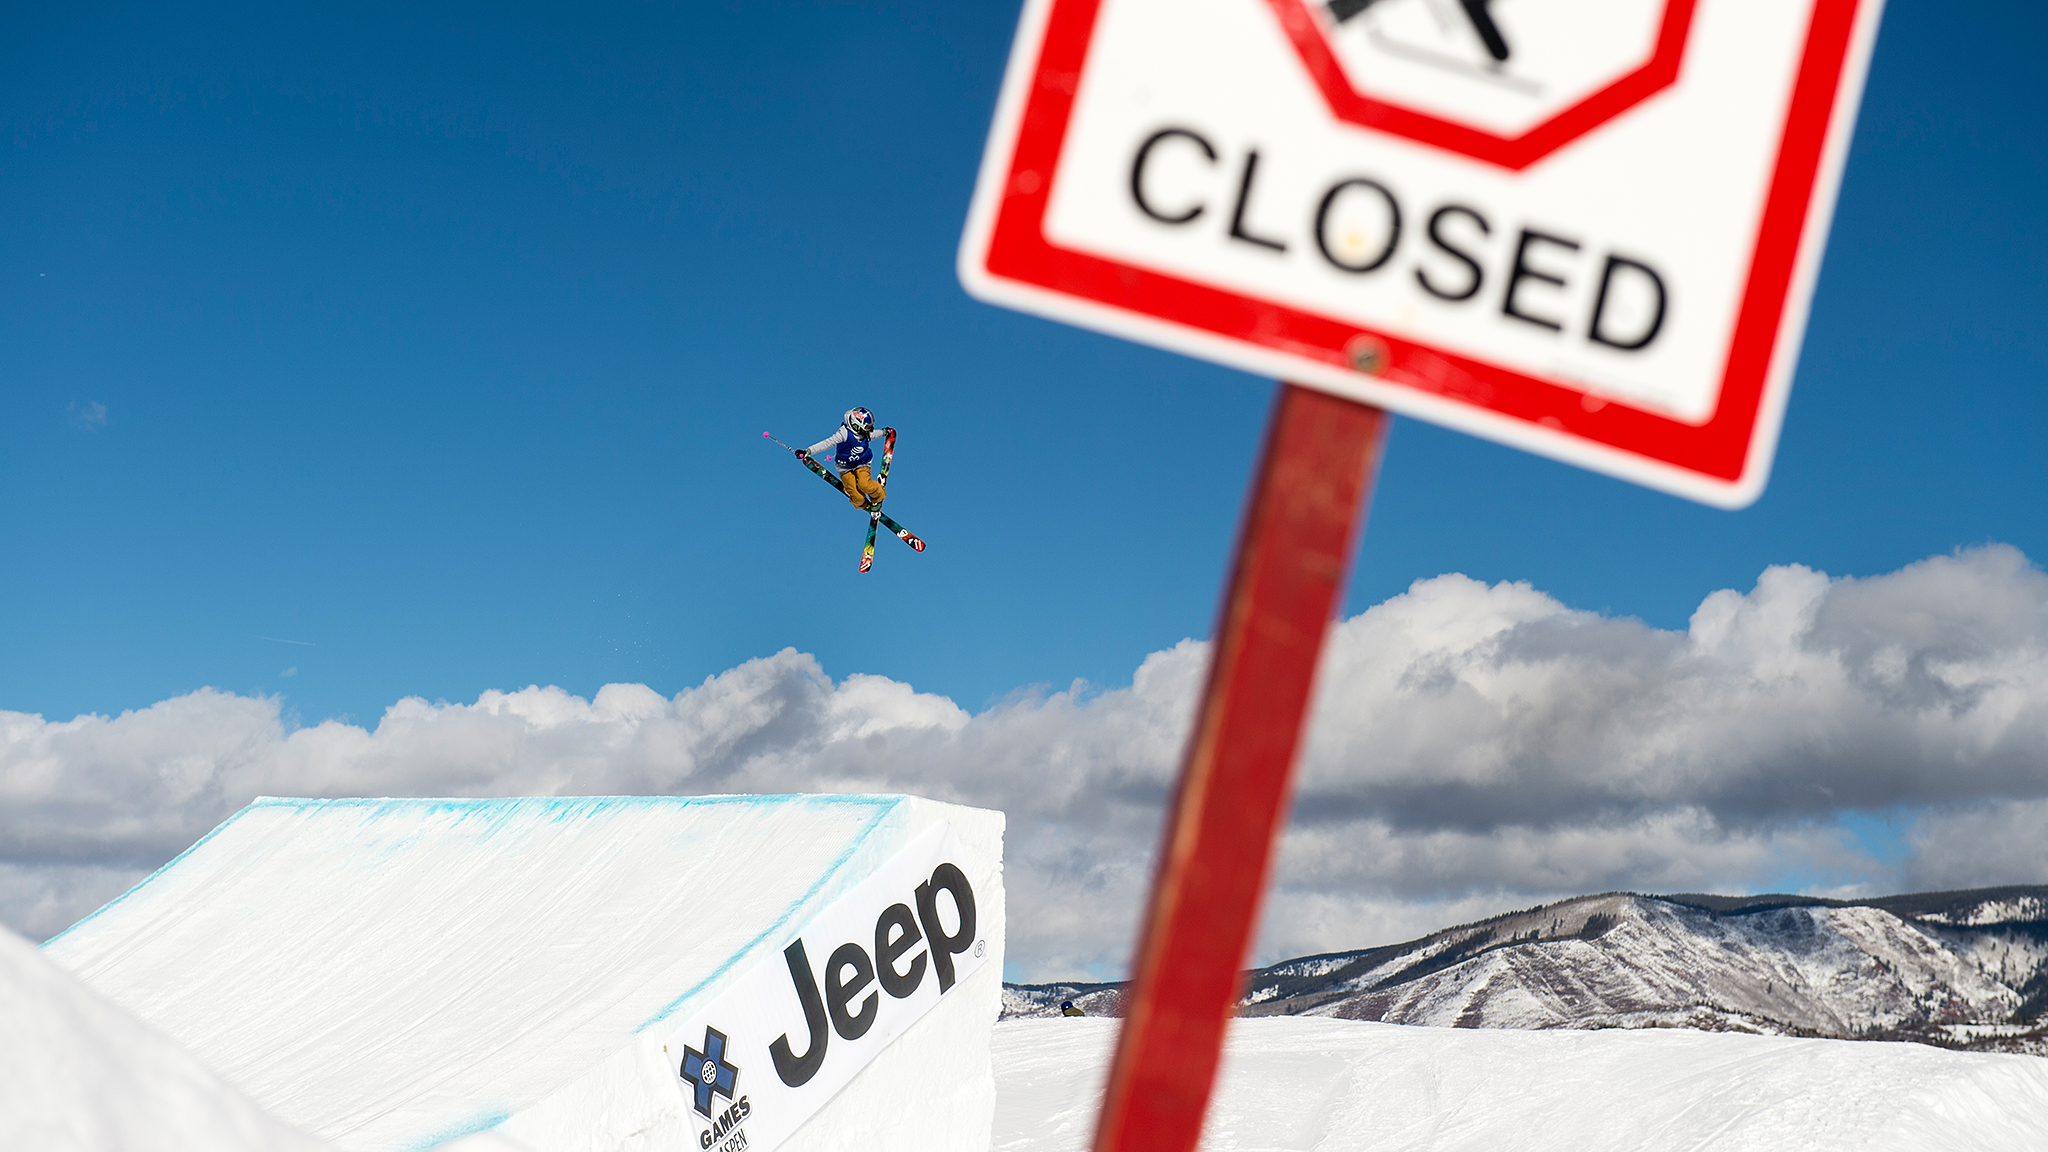 Thirteen-year-old Kelly Sildaru, a pint-siz freeskier from Estonia, made history on Friday when she topped the podium in Women's Ski Slopestyle, becoming the youngest athlete ever to win a gold medal at a Winter X Games. The video of her run immediately went viral, with fans from all over the world offering congratulations in multiple languages on Facebook.